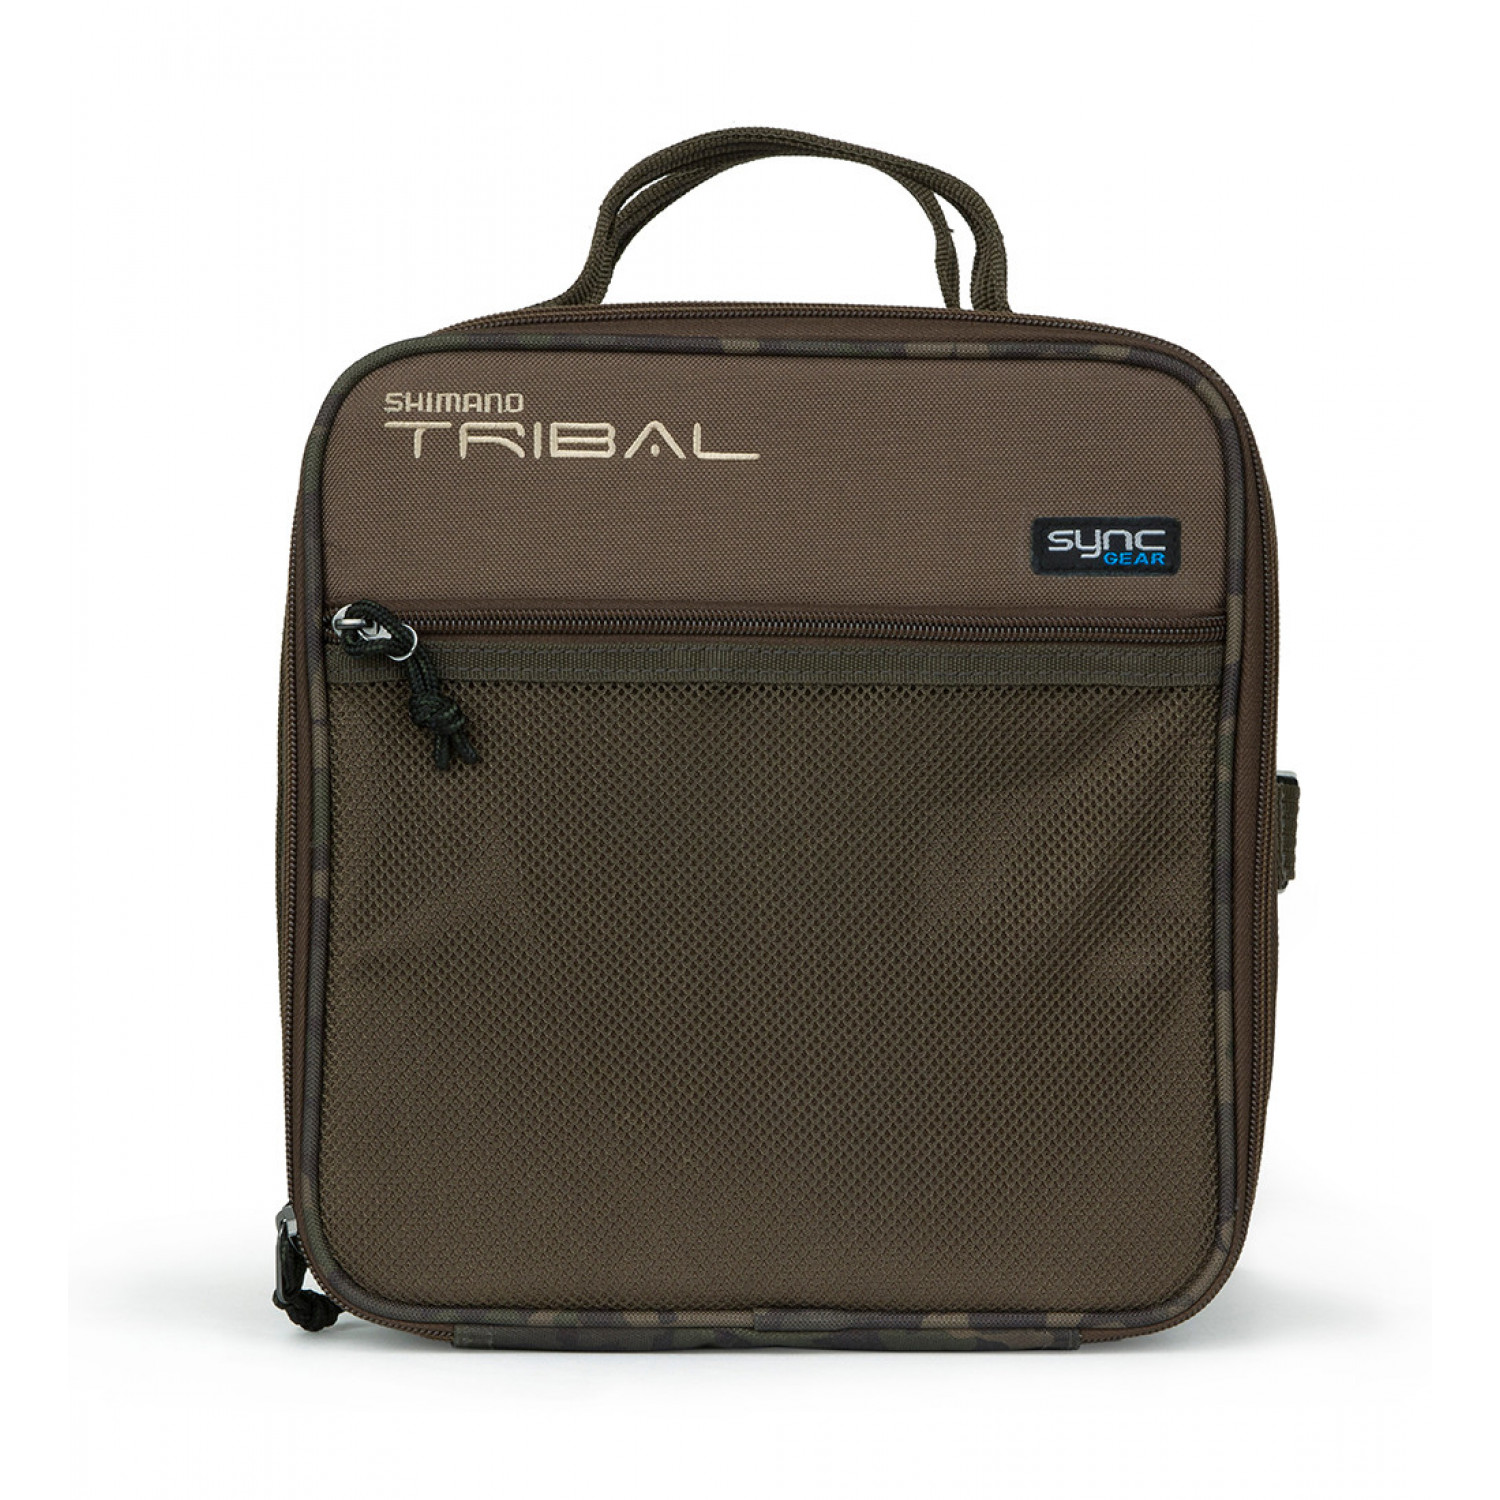 Shimano Tribal Sync Gear Accessory Case extra large, 27x25x10cm, SHTSC03